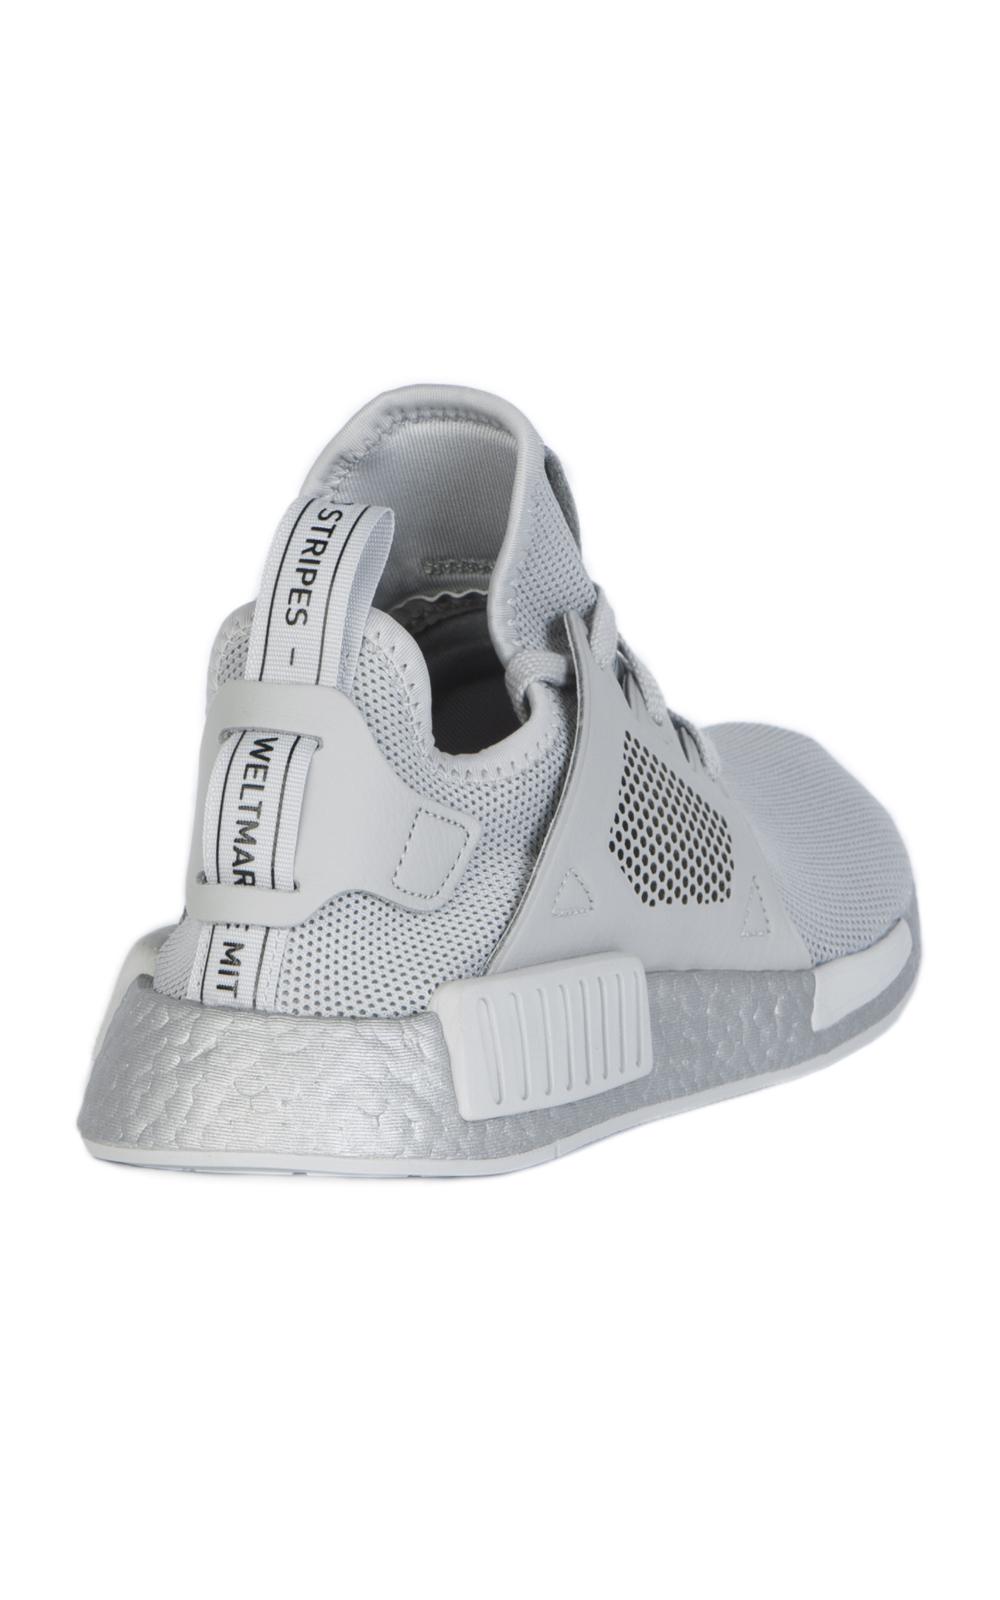 Envision vej pensum adidas Originals Leather Nmd Xr1 Triple Grey in Gray for Men - Lyst